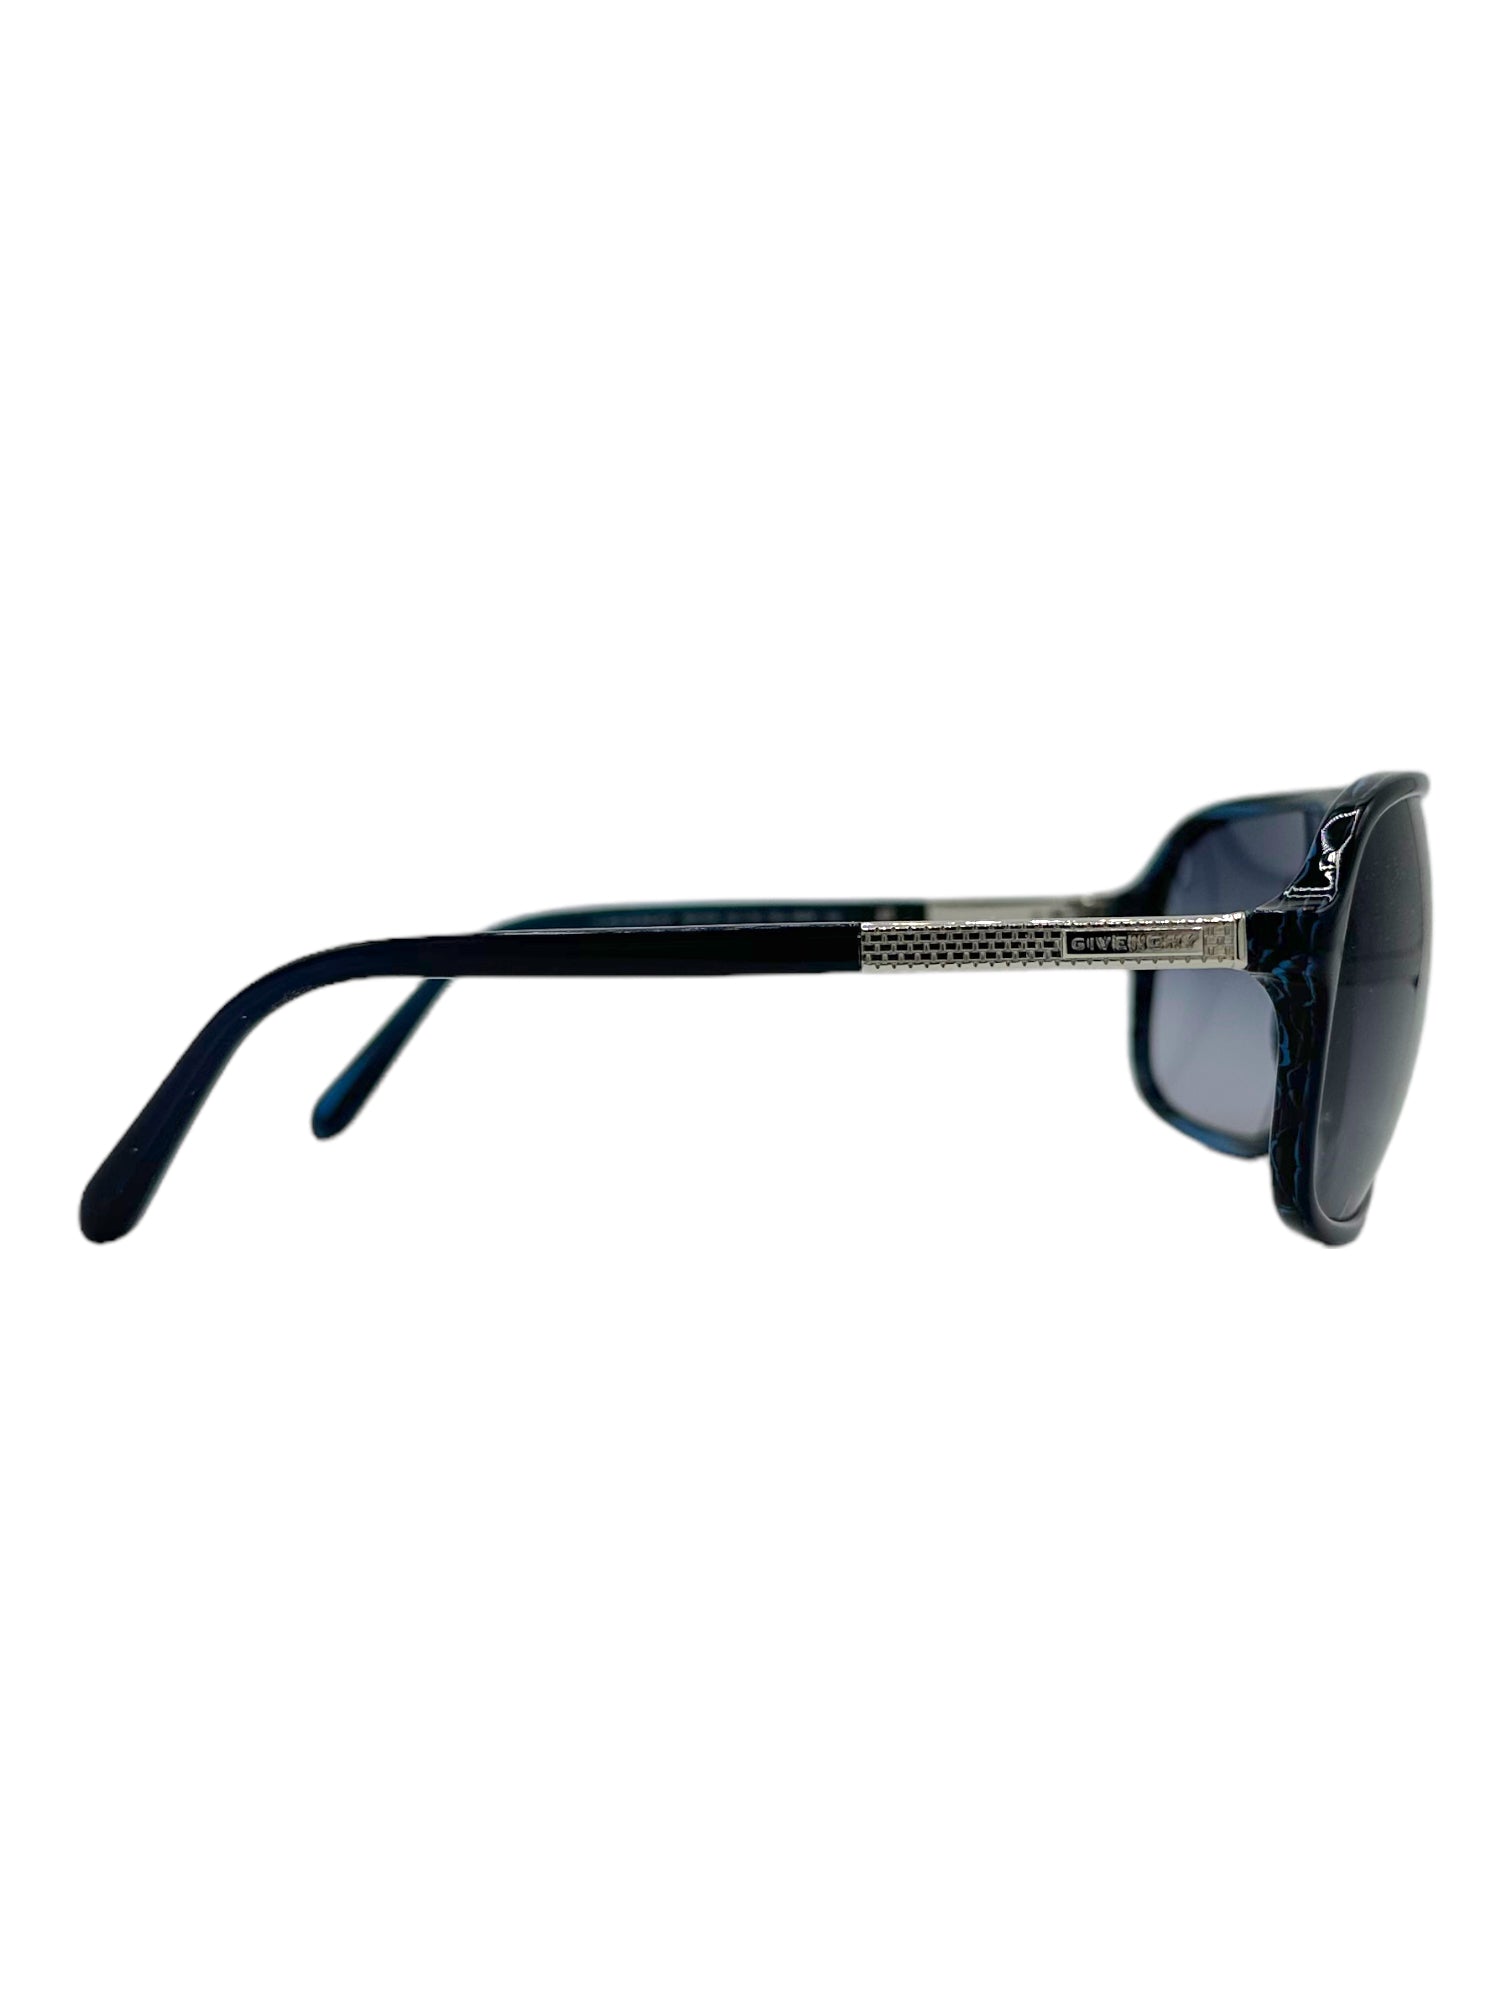 Givenchy SGV 816 Navy Rounded Aviator Sunglasses - Genuine Design Luxury Consignment for Men. New & Pre-Owned Clothing, Shoes, & Accessories. Calgary, Canada